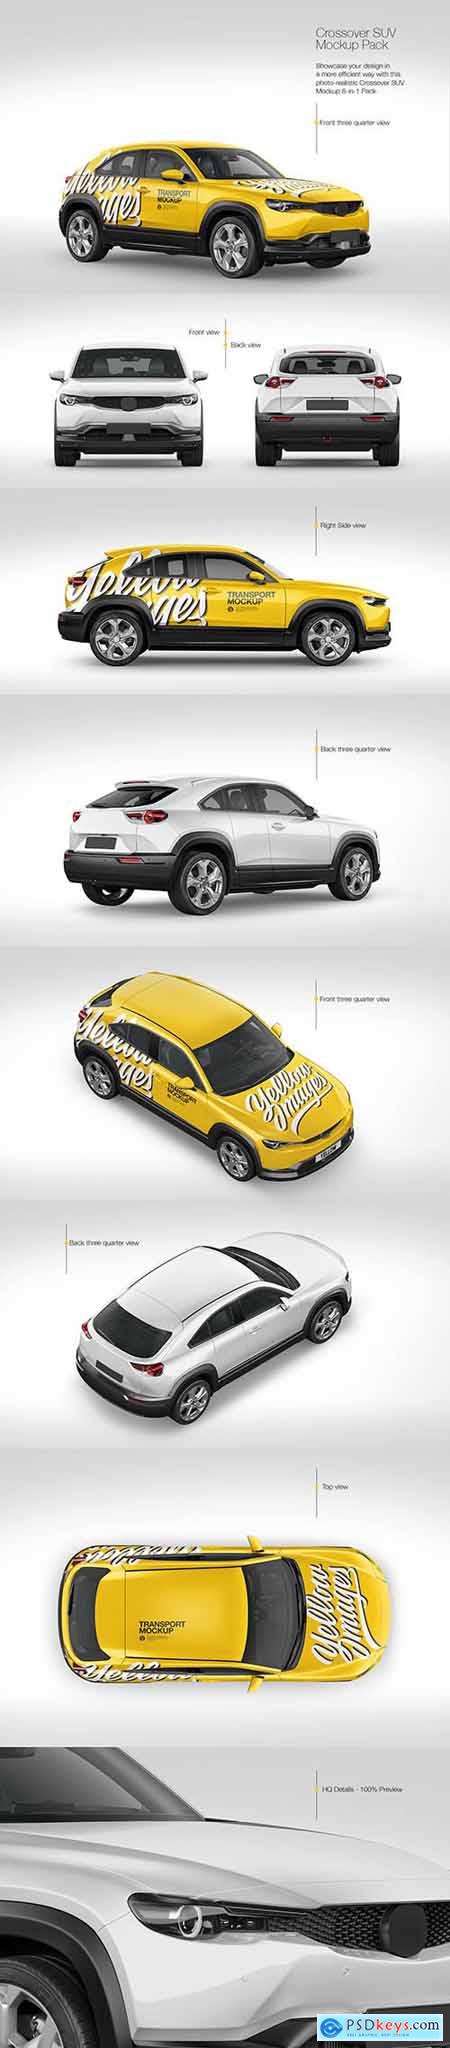 Compact Crossover SUV Mockup - Pack